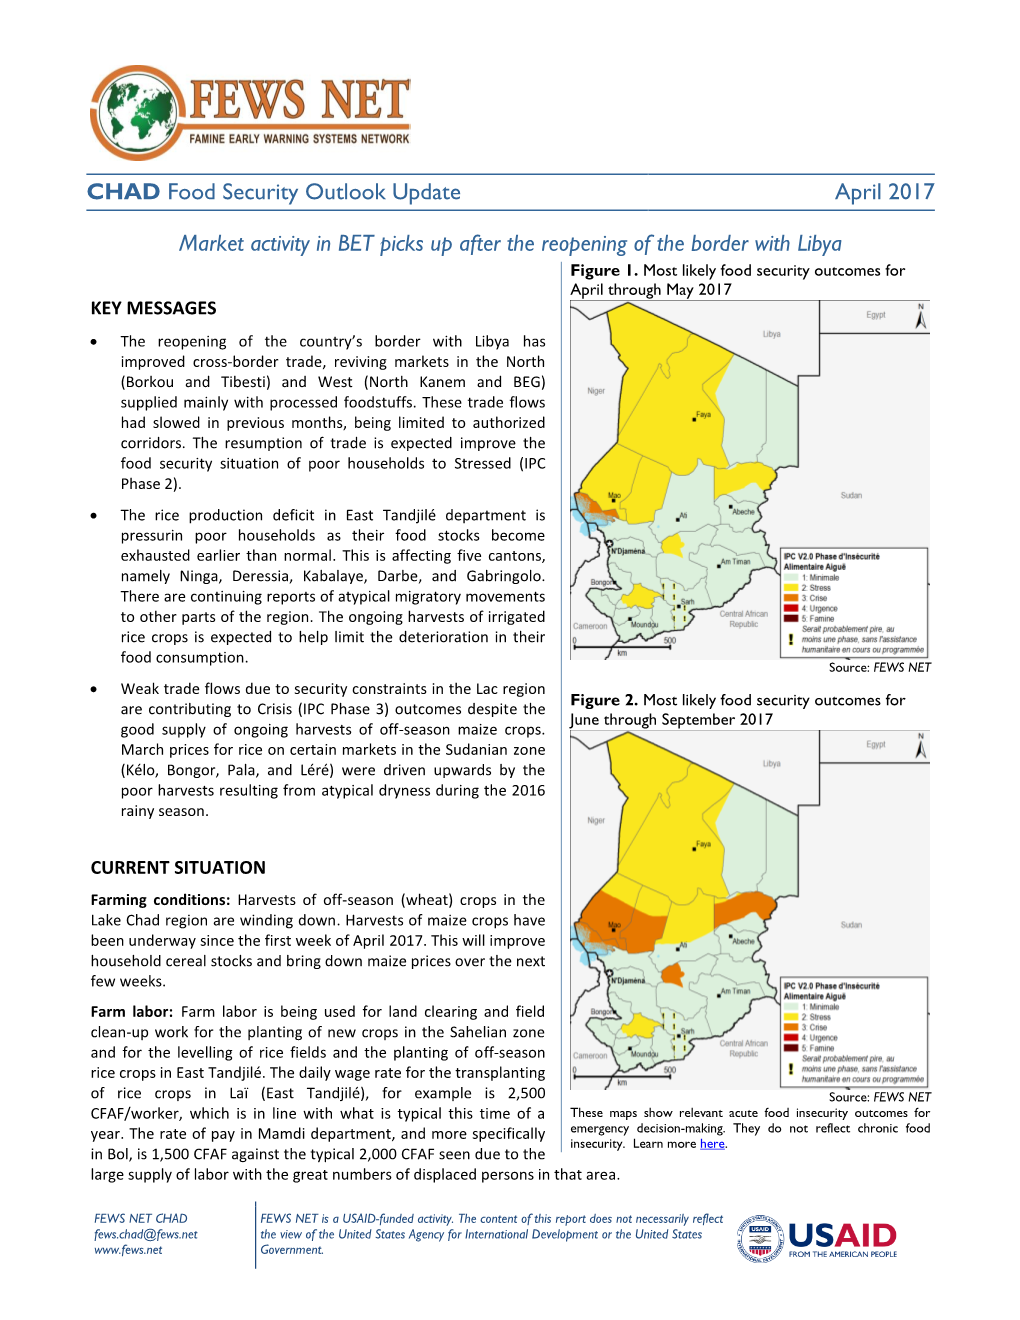 Chad Food Security Outlook Update for April 2017